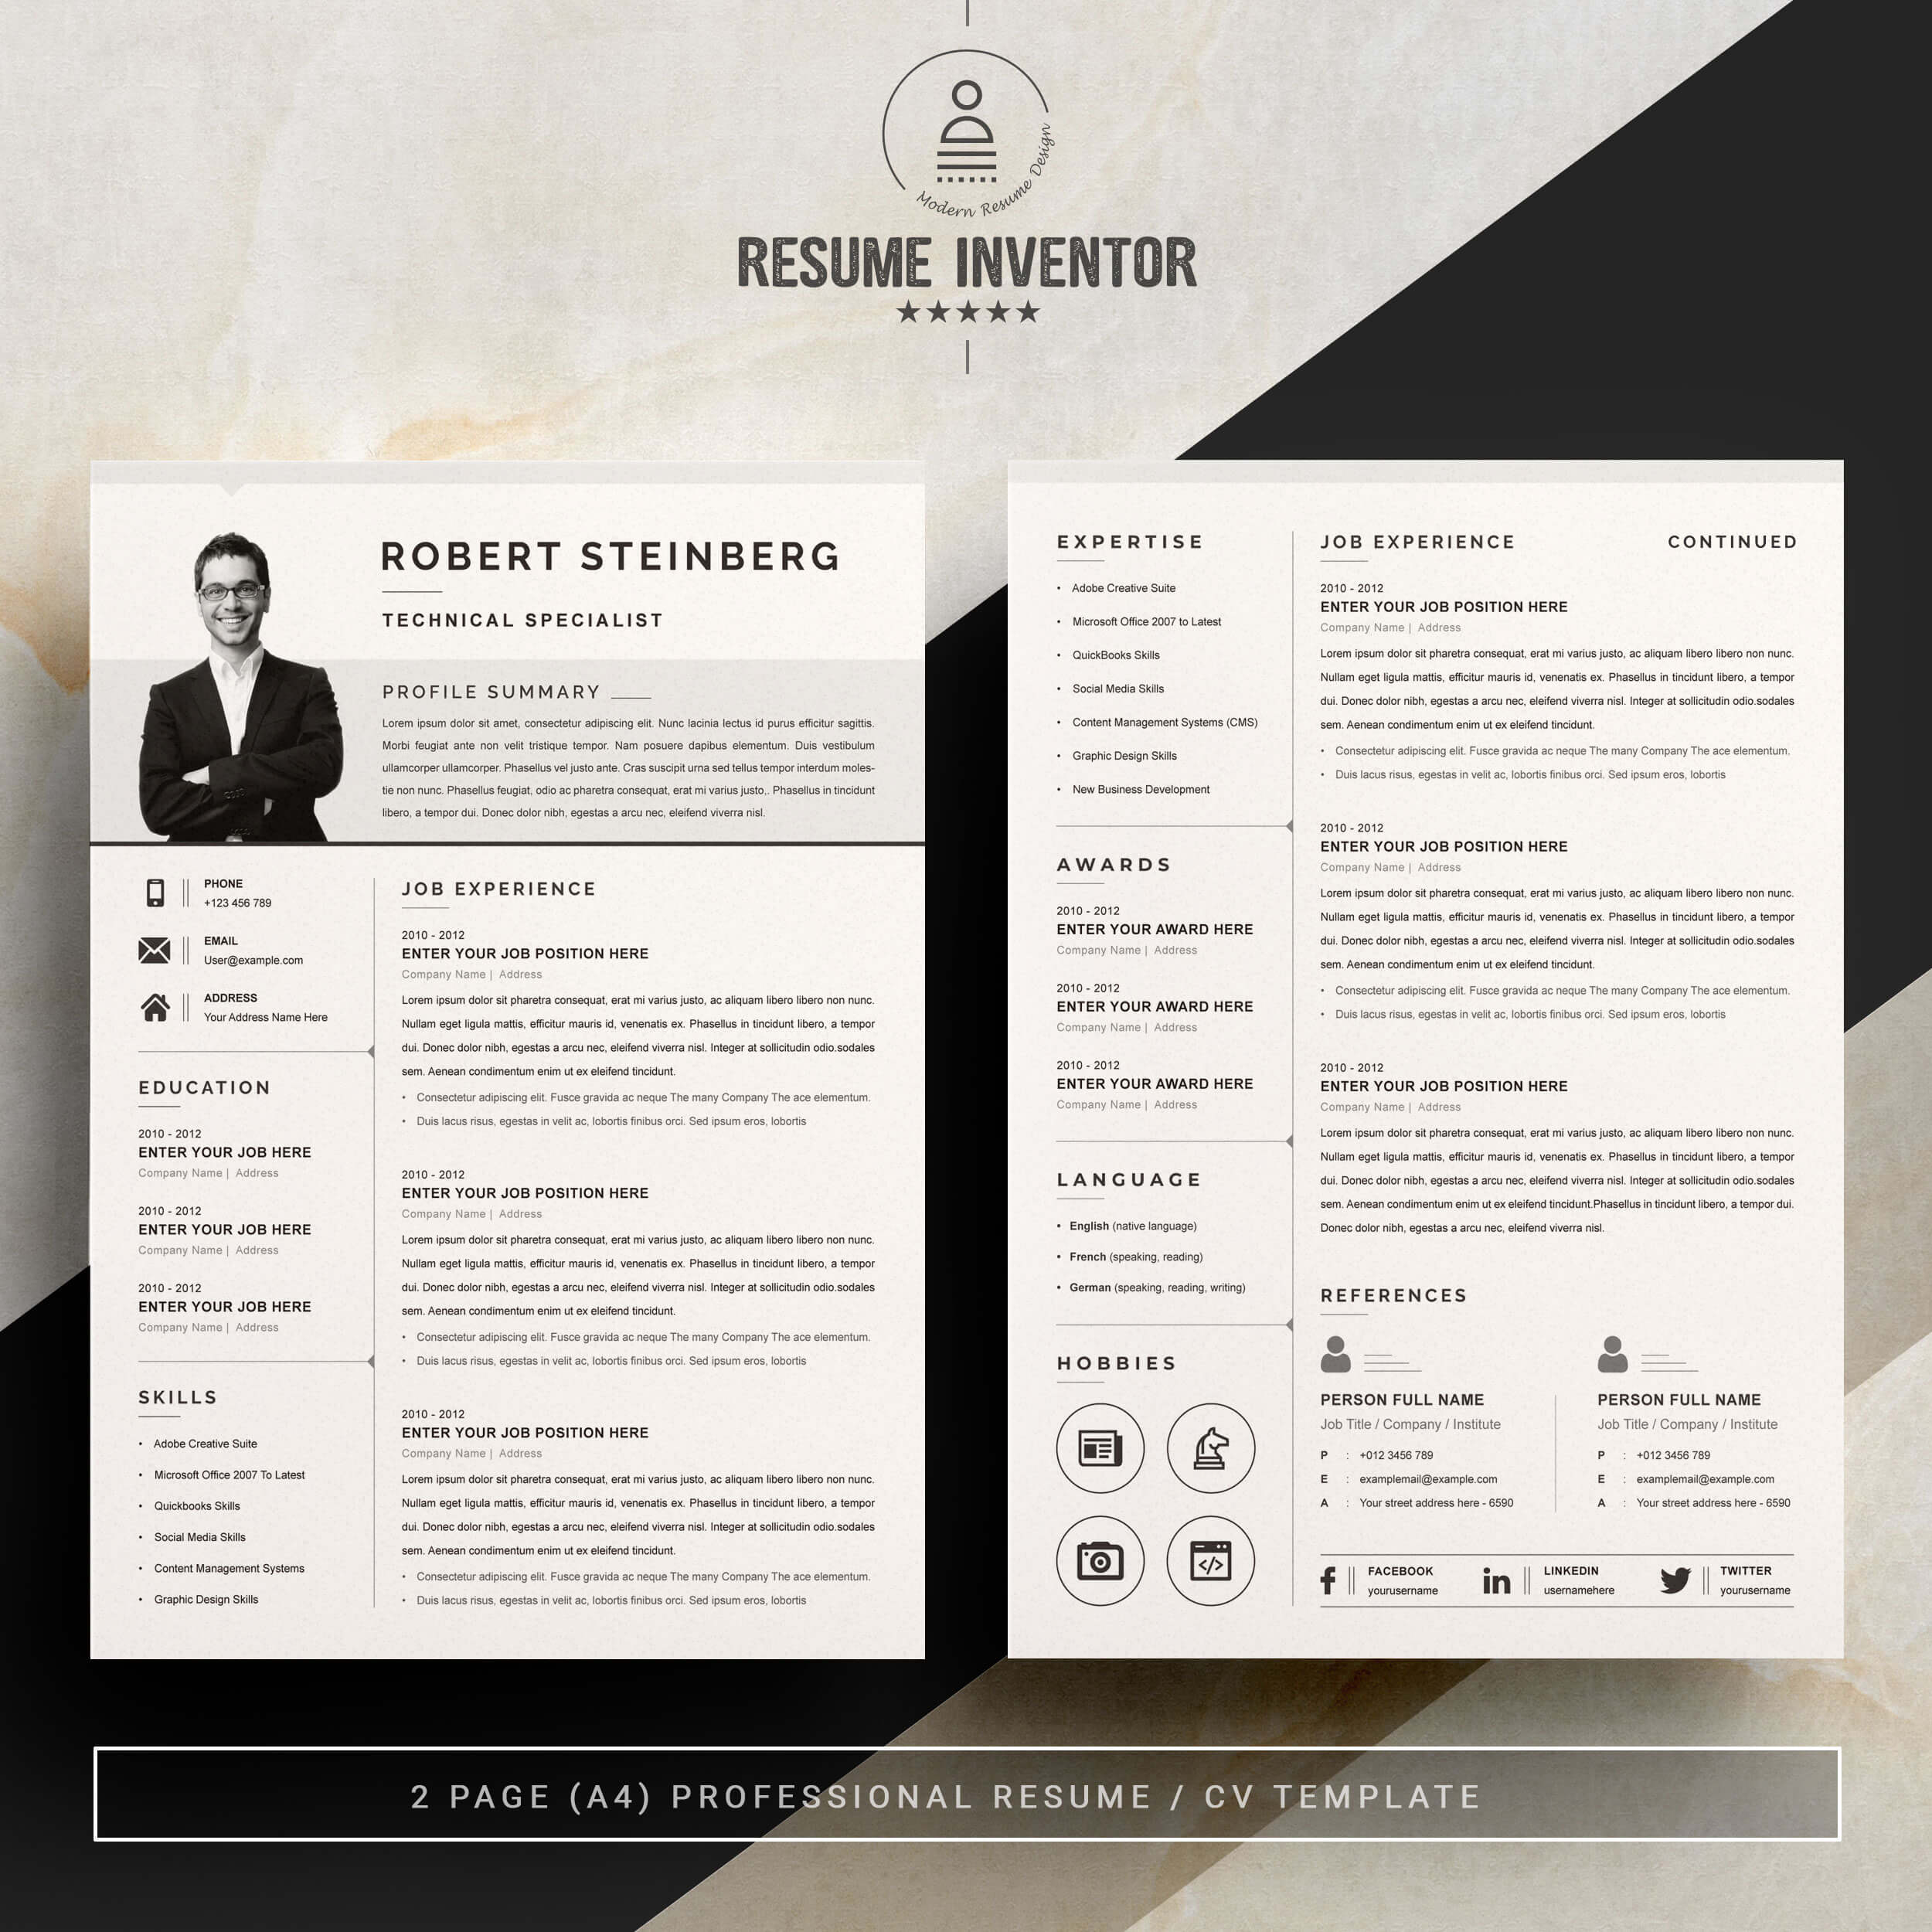 Technical Specialist Resume Template Design | Modern Resume & CV Template preview image.